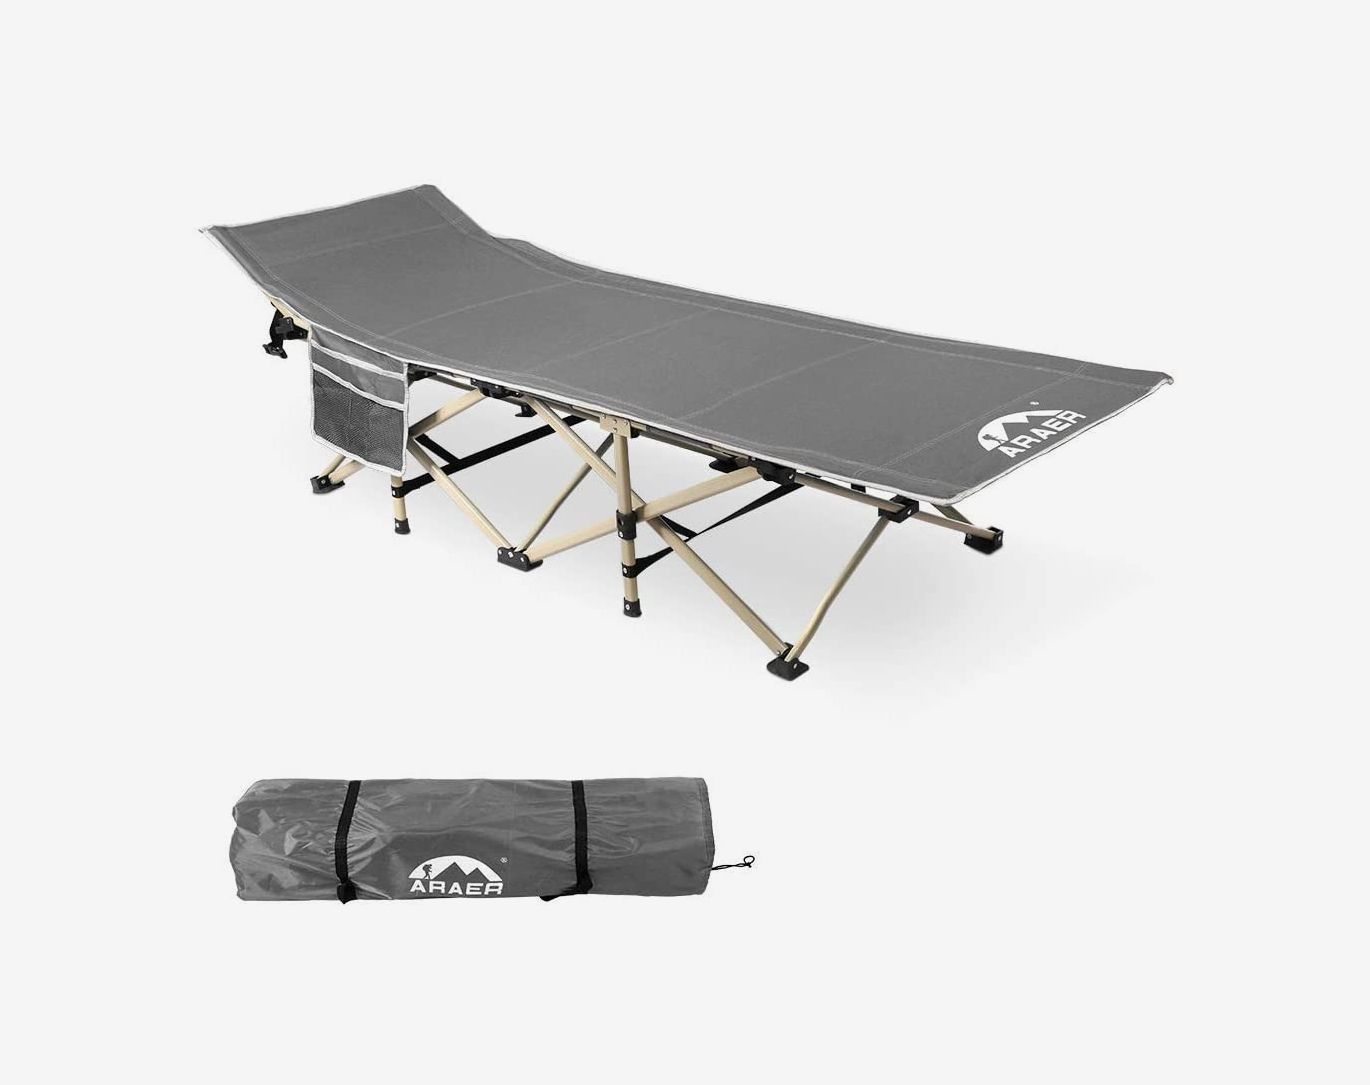 CAMPMAX Camping Cots for Aduts Most Comfortable Blue and Grey Double Layer Oxford Sturdy Folding Sleeping Cots for Heavy People Outdoor Travel Home Use Portable with Carry Bag